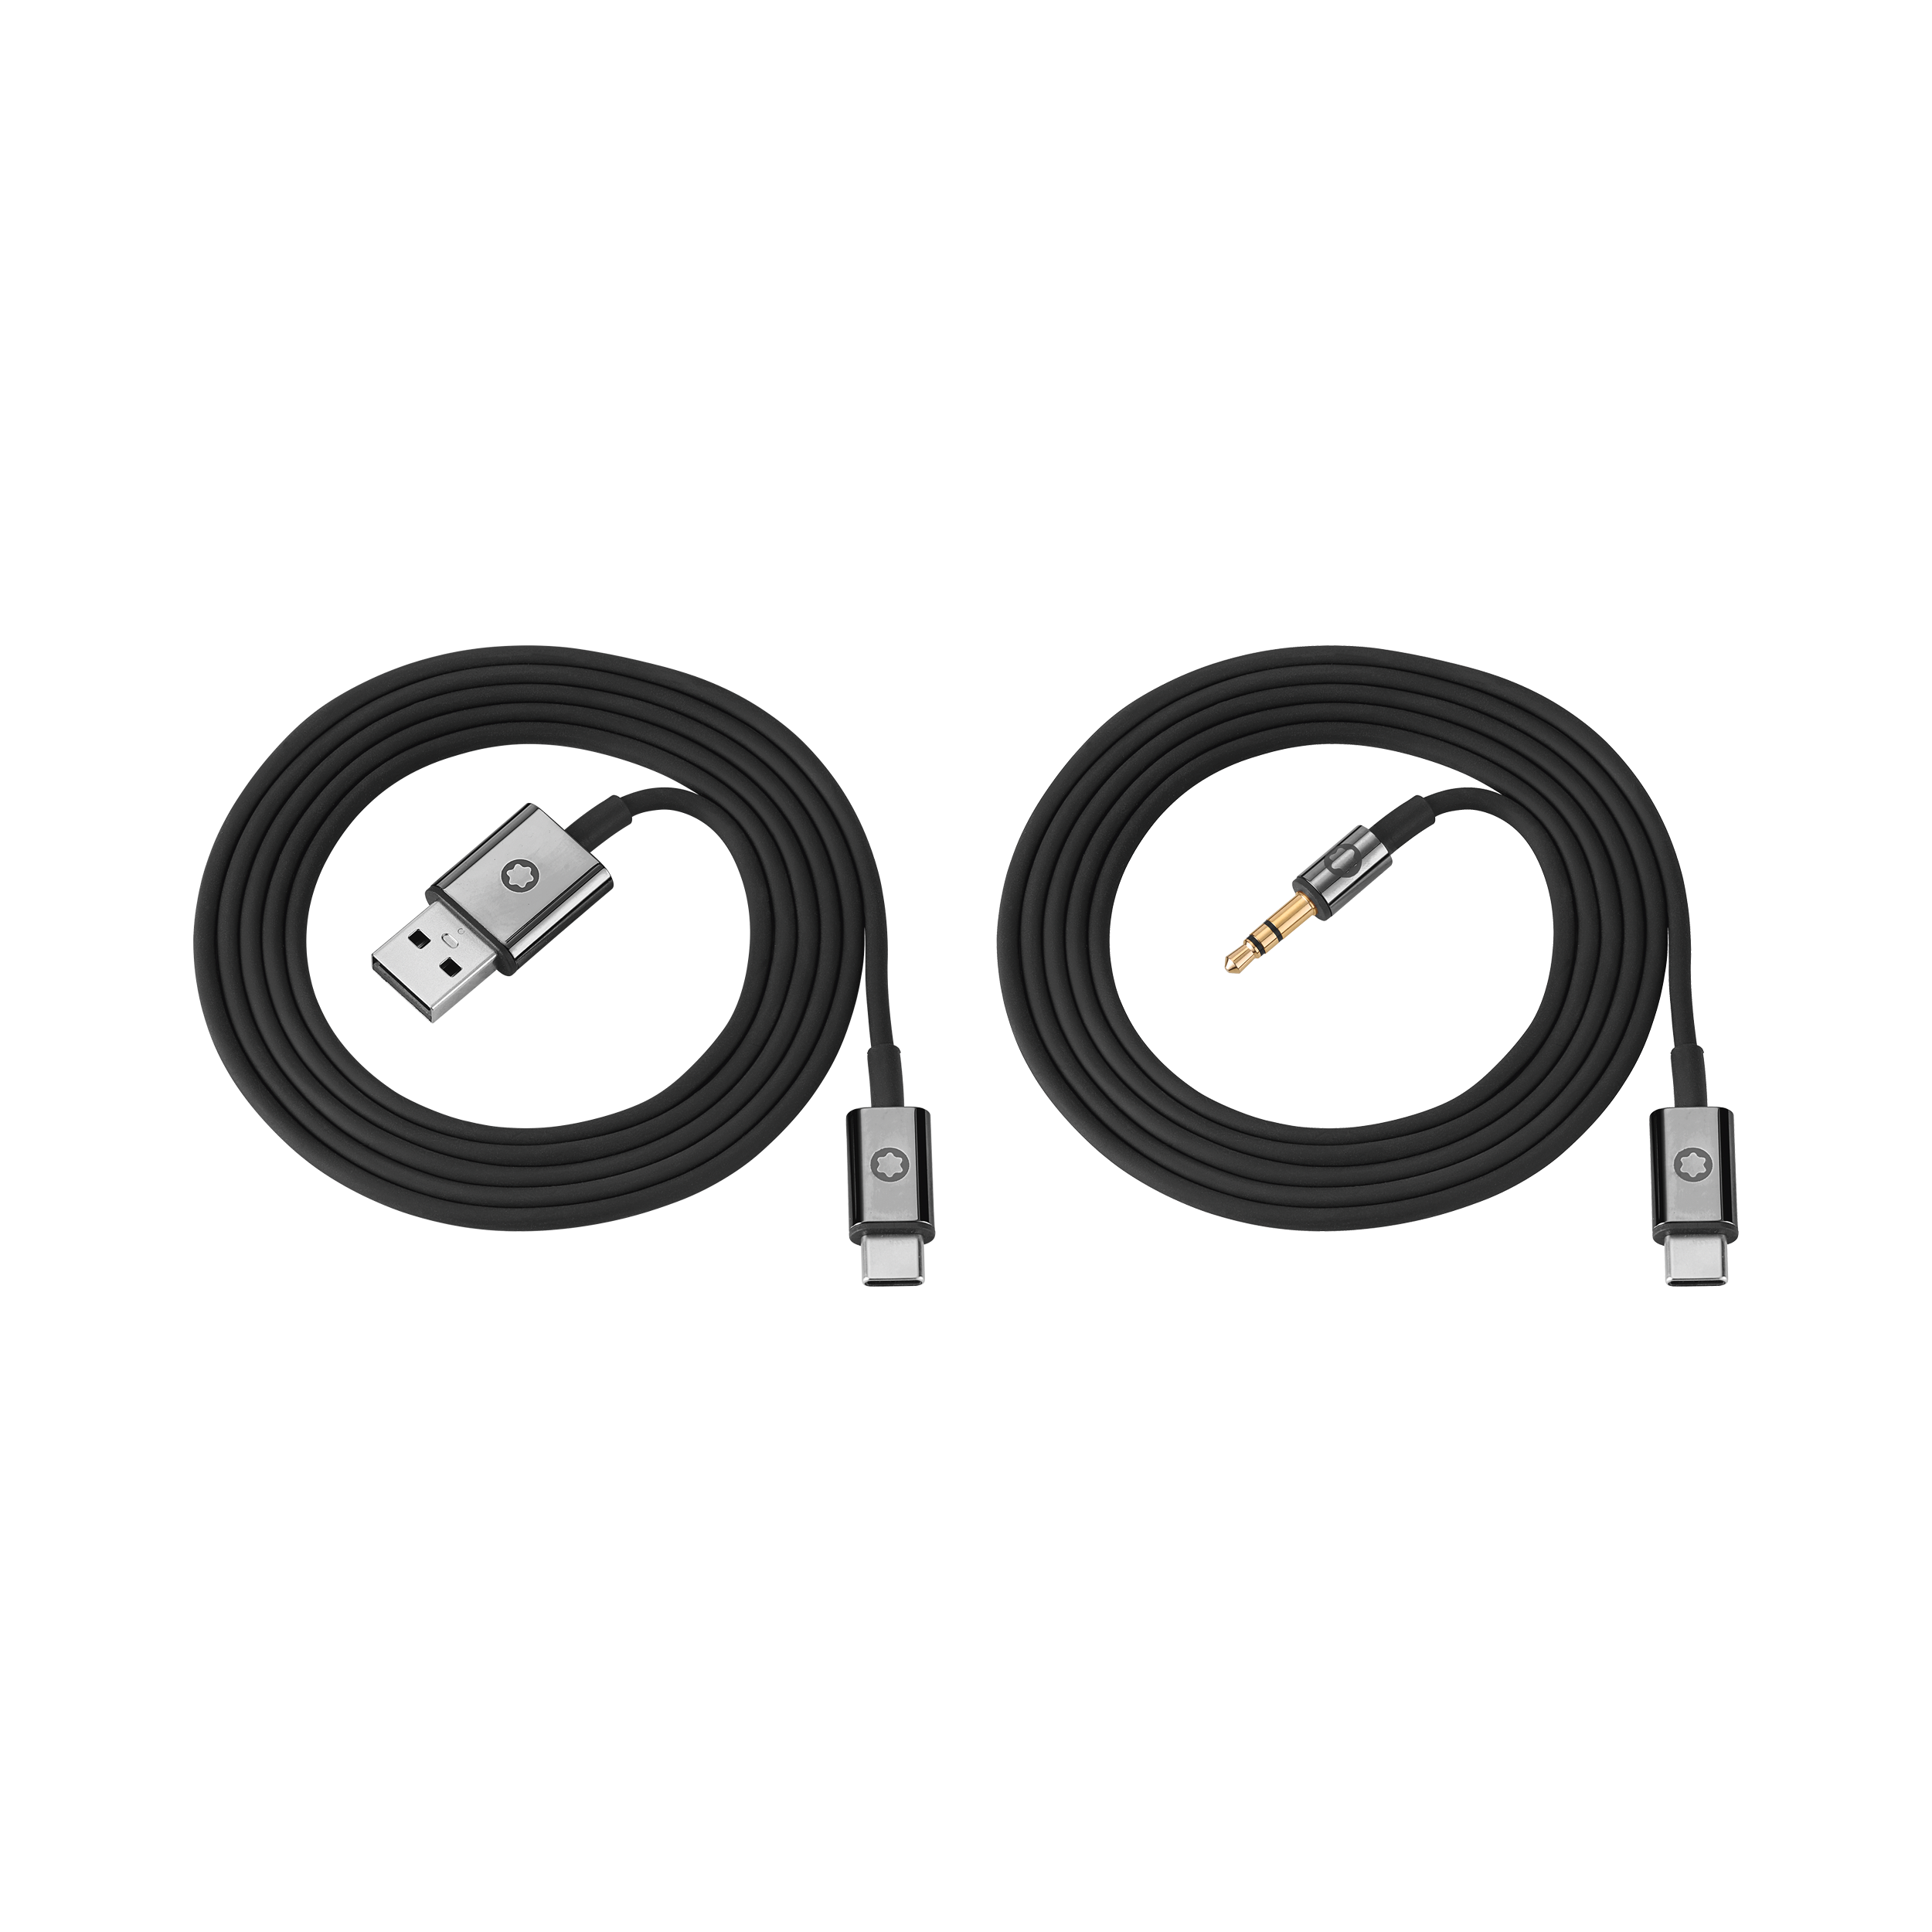 Black Cable Set for Montblanc MB 01 Headphones, image 1